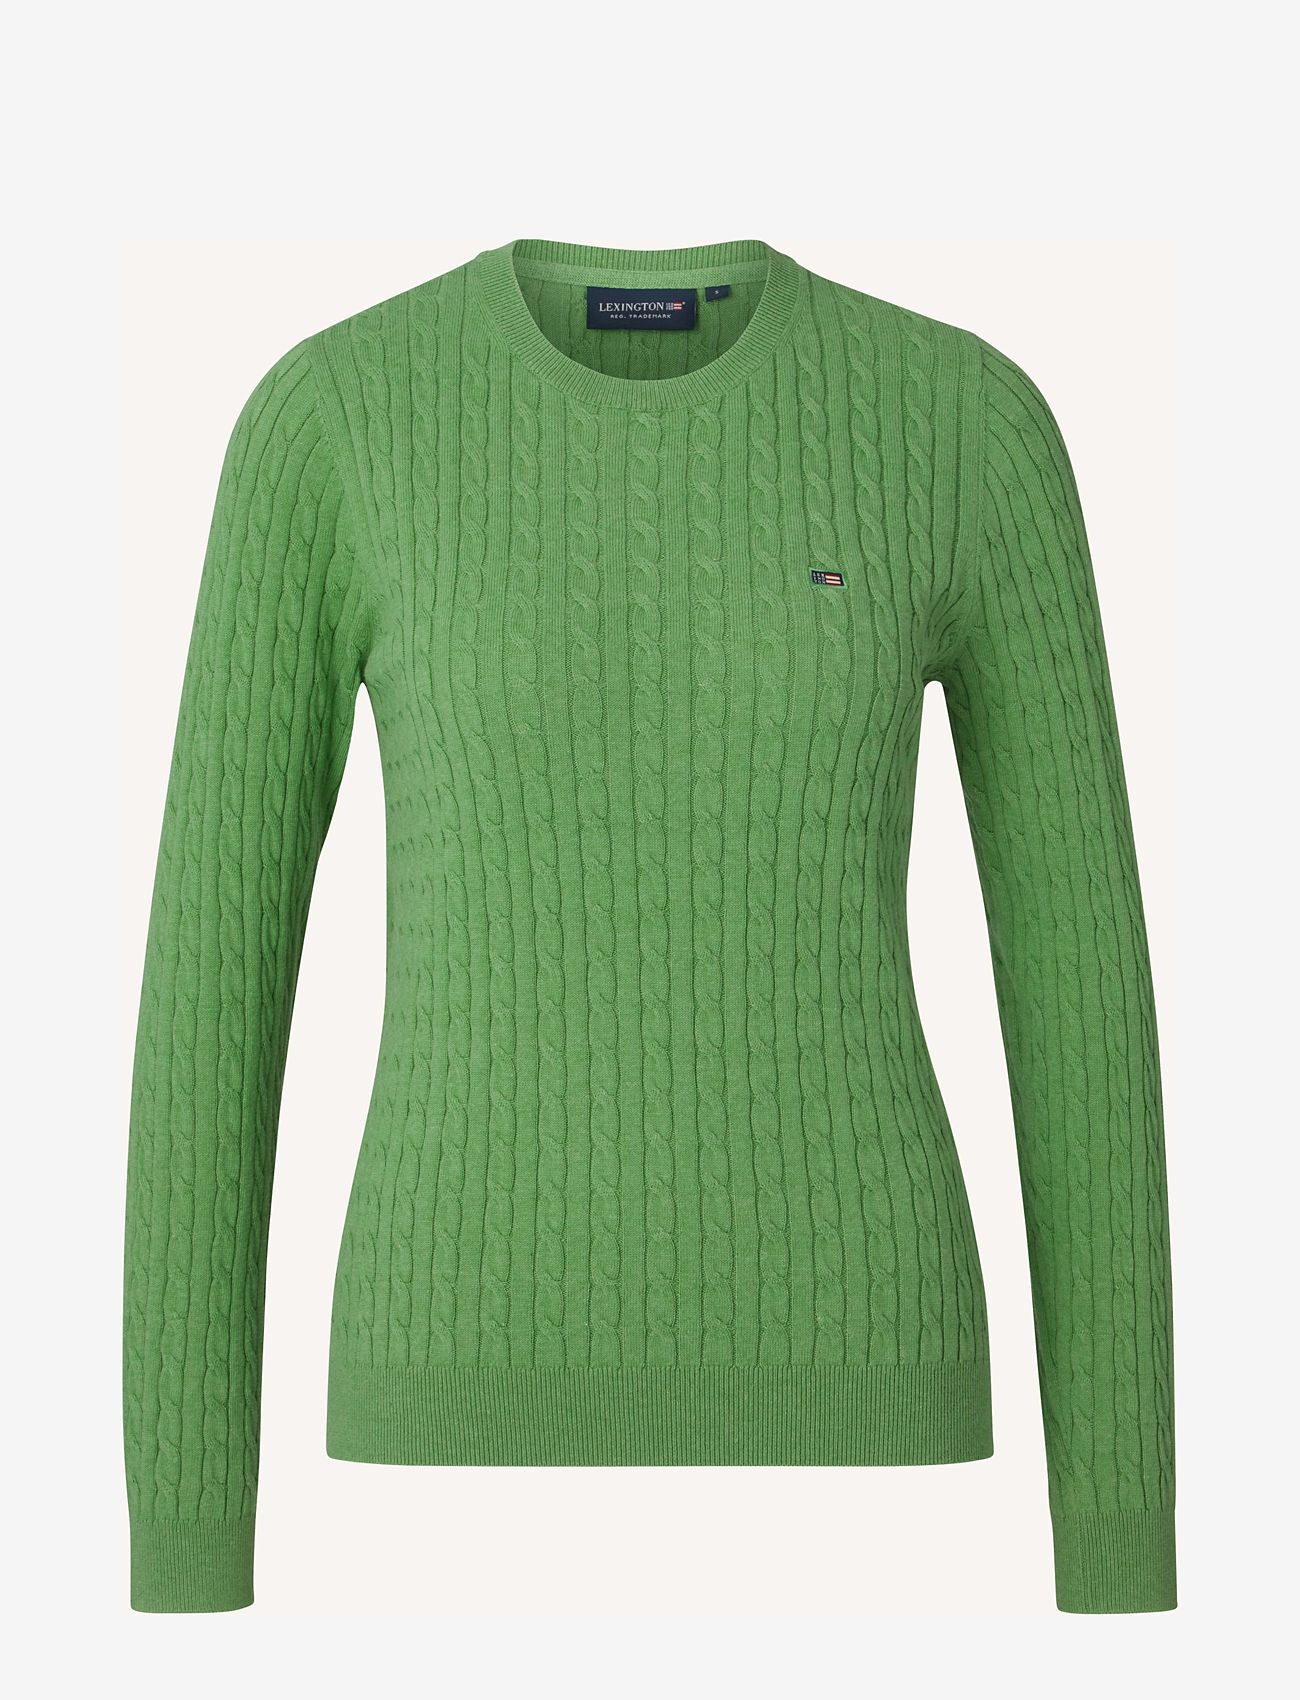 Lexington Clothing - Marline Organic Cotton Cable Knitted Sweater - džemperiai - green - 0